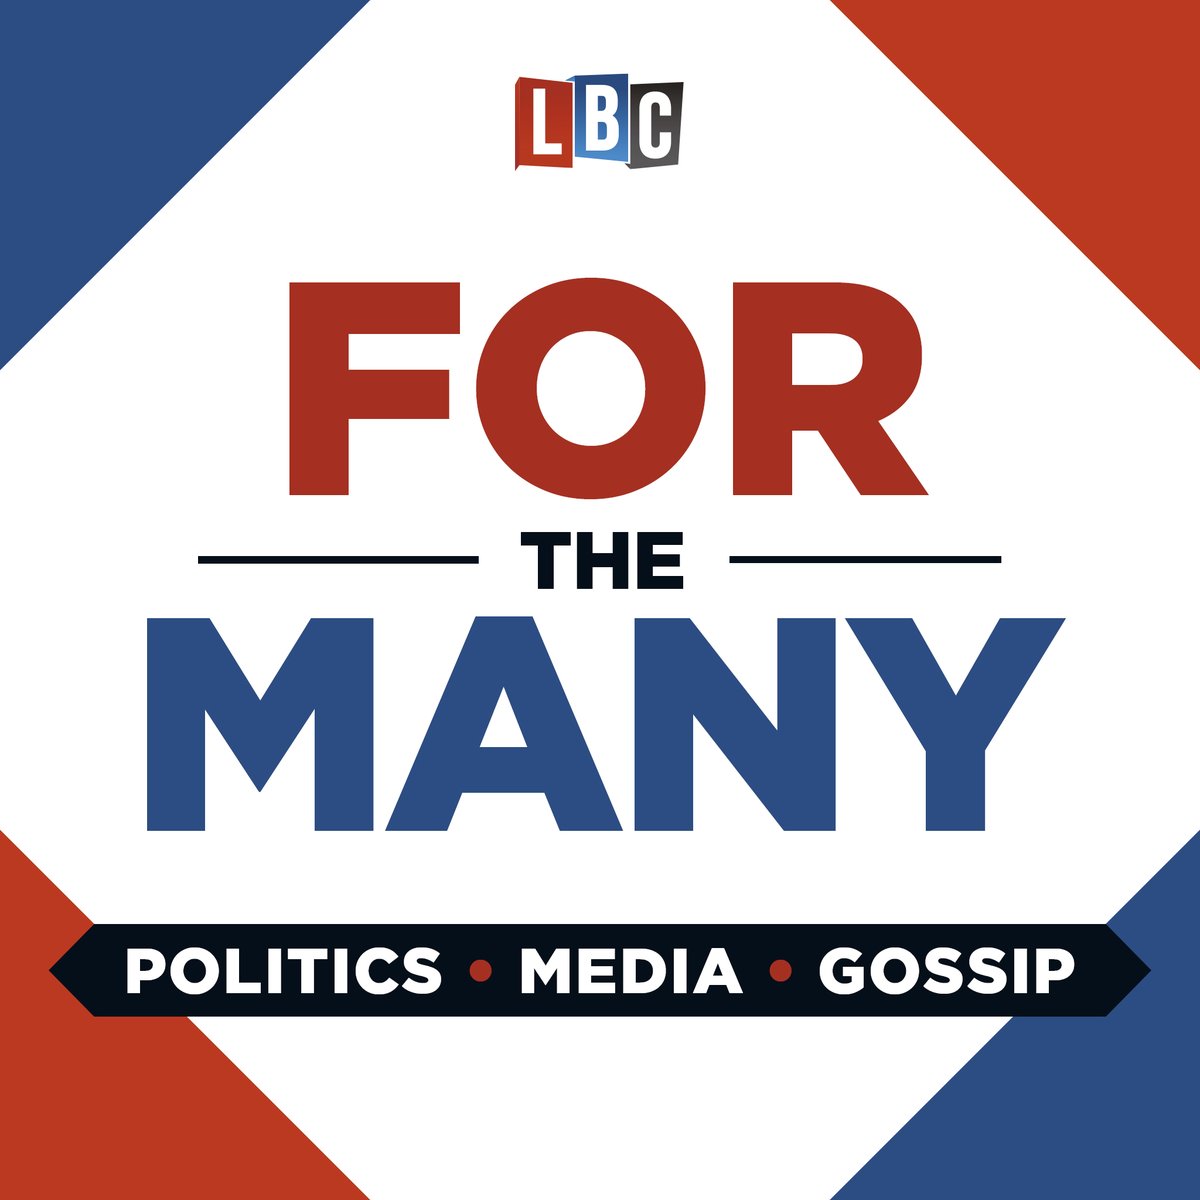 NEW EPISODE OF THE FOR THE MANY PODCAST 448. Poll Dancers @Jacqui_Smith1 and I discuss the local election results so far. Listen podcasts.apple.com/gb/podcast/448…